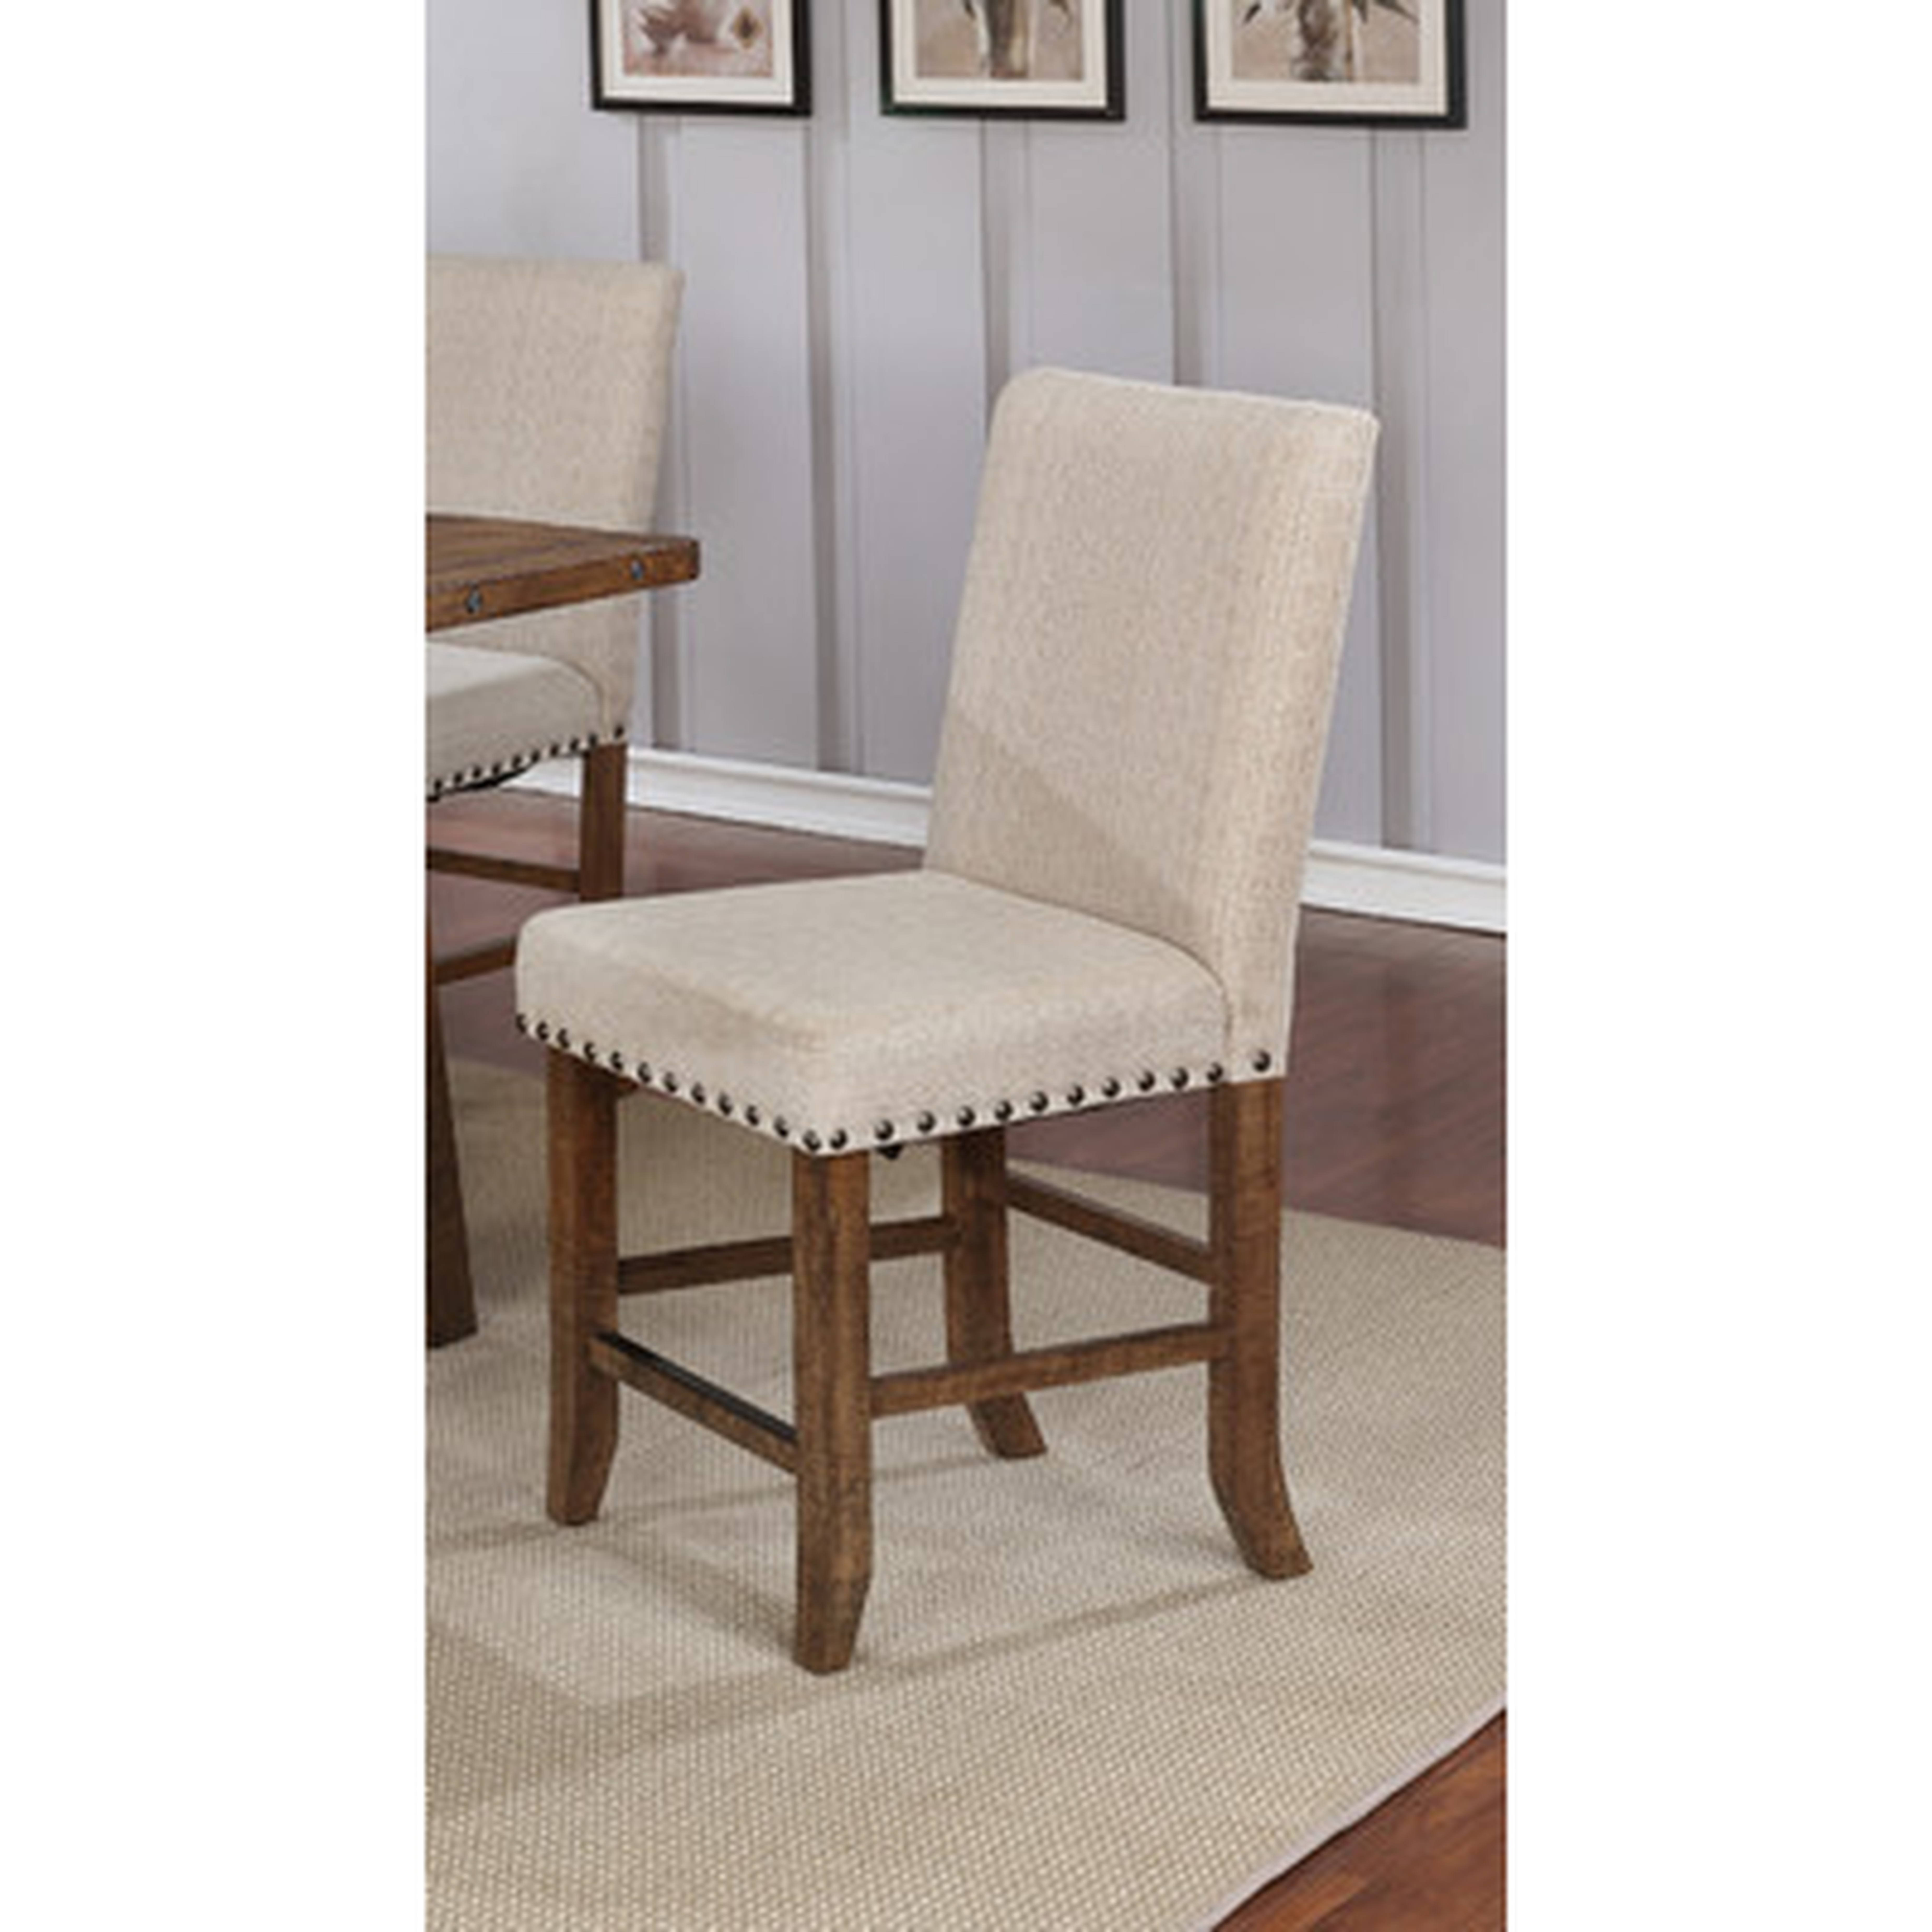 Upholstered Dining Chair - set of 2 - Wayfair